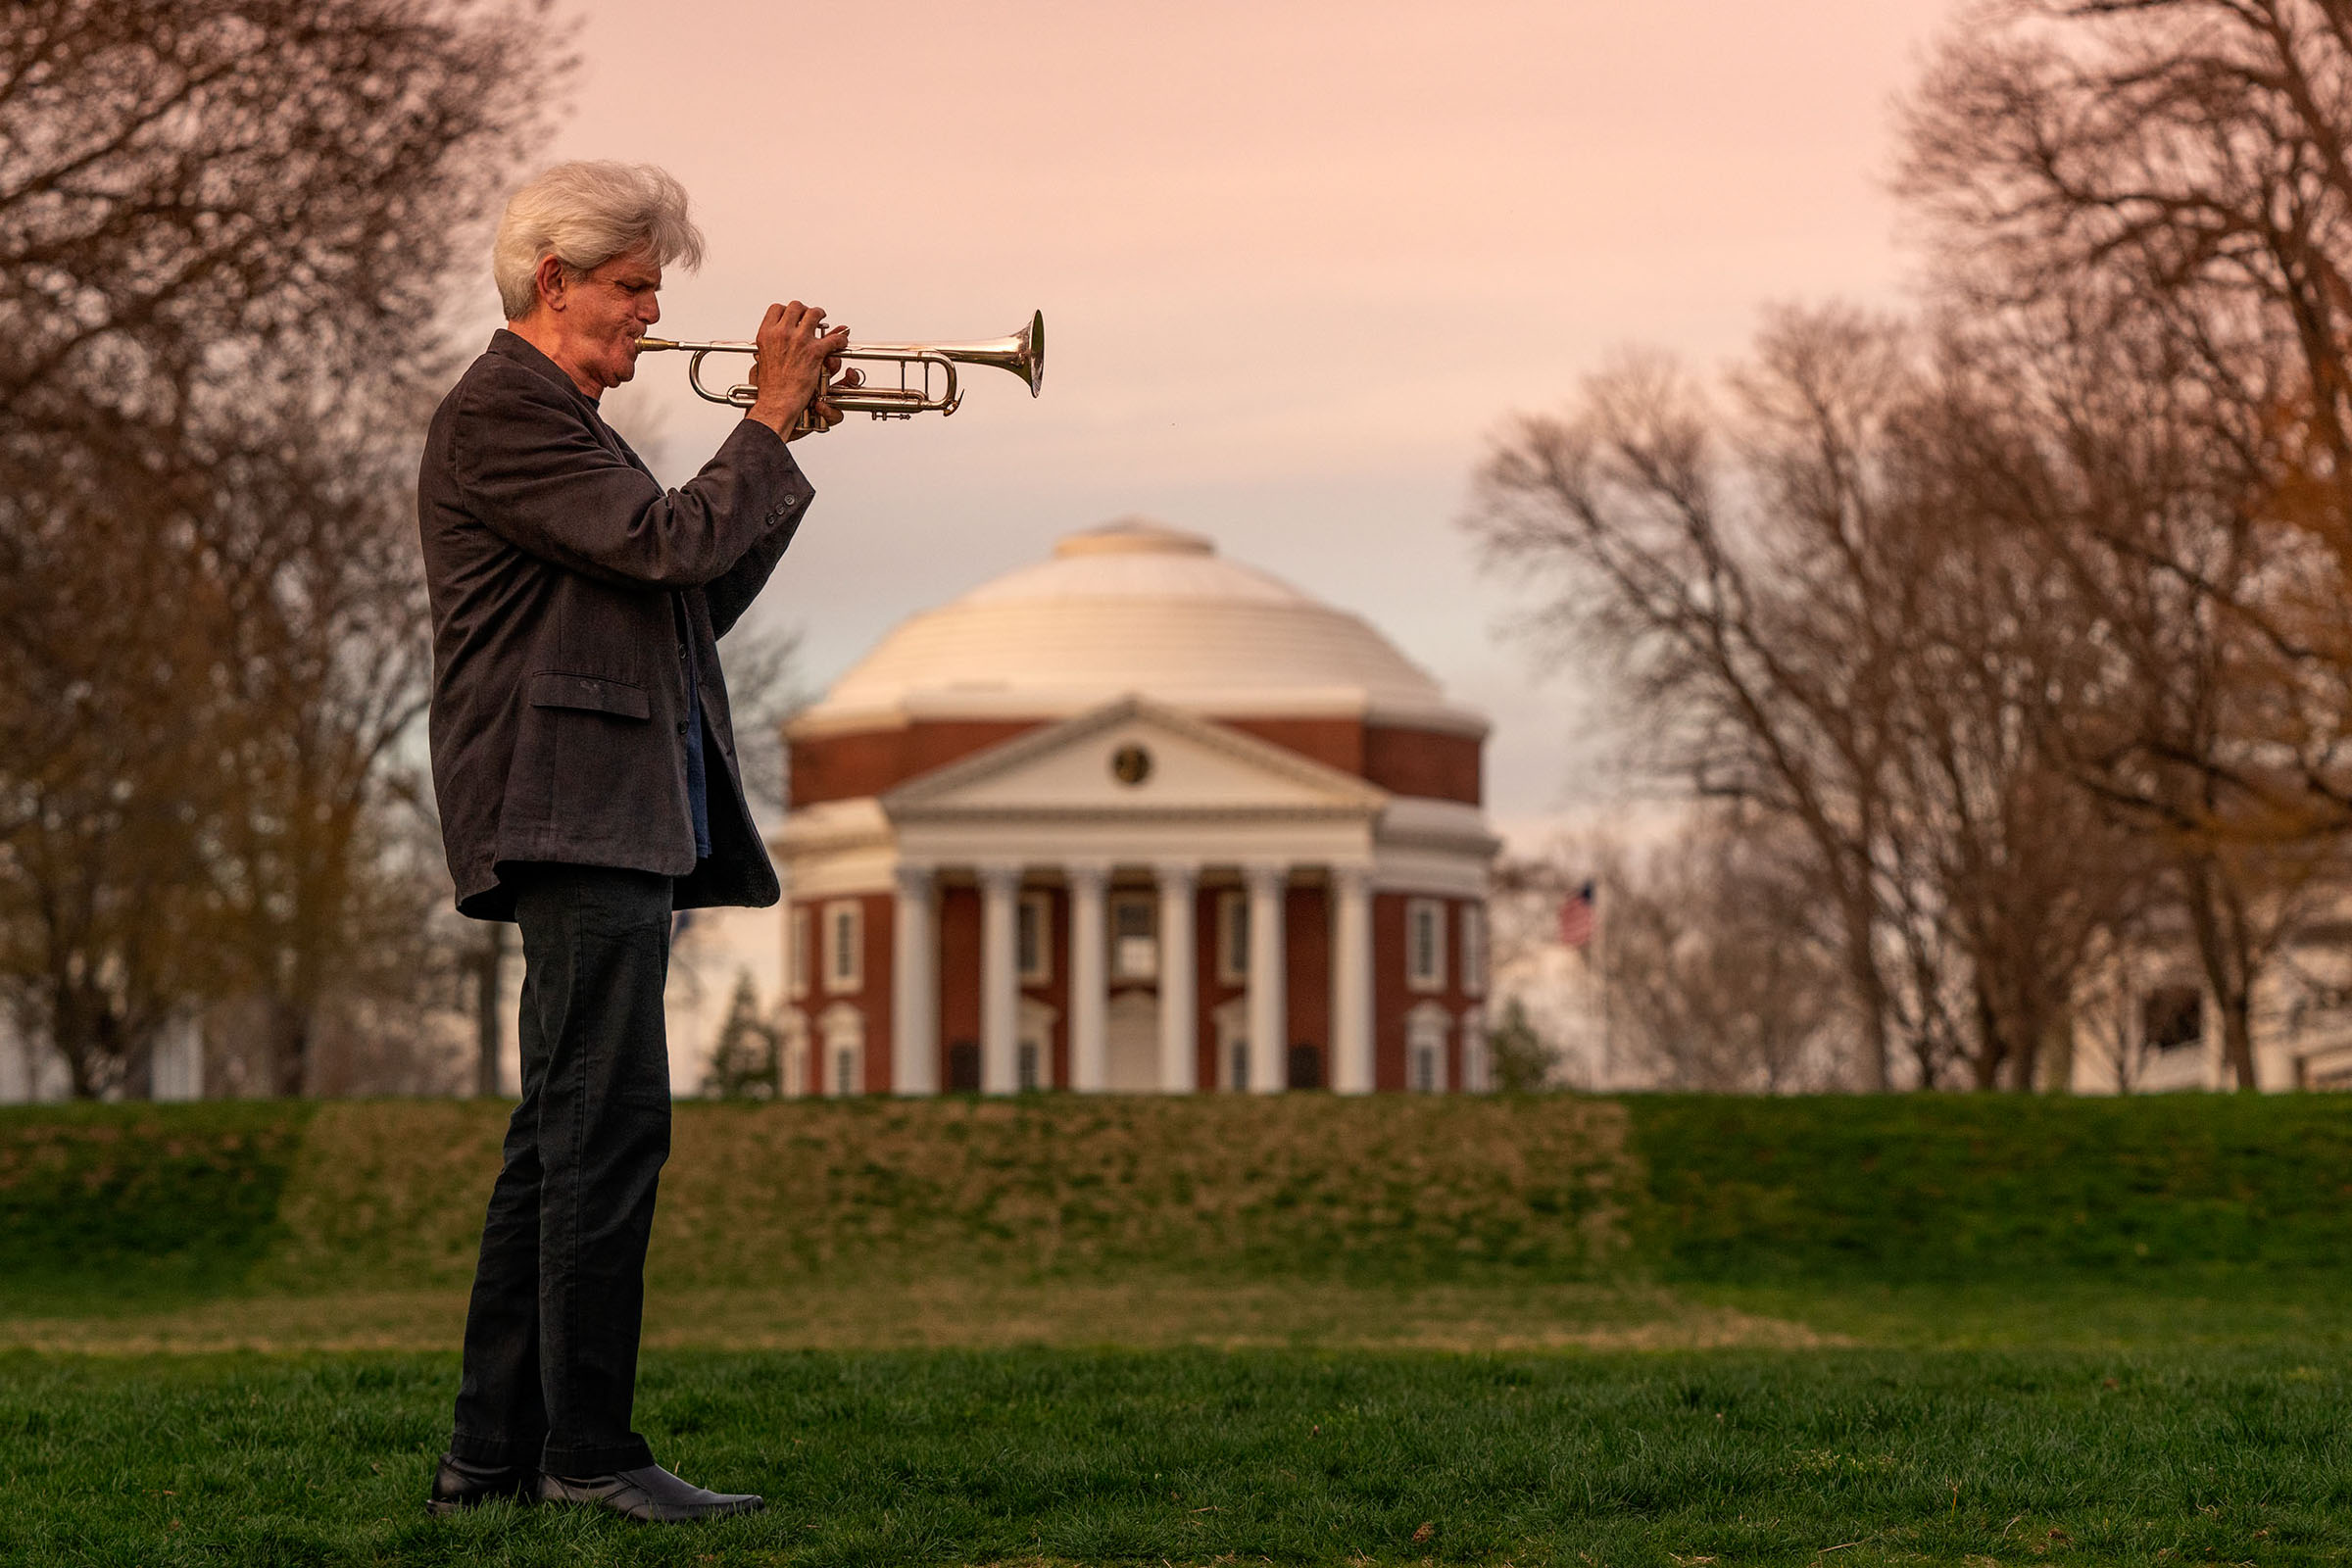 John Dearth facing right in the image plays his trumpet in front of the Rotunda